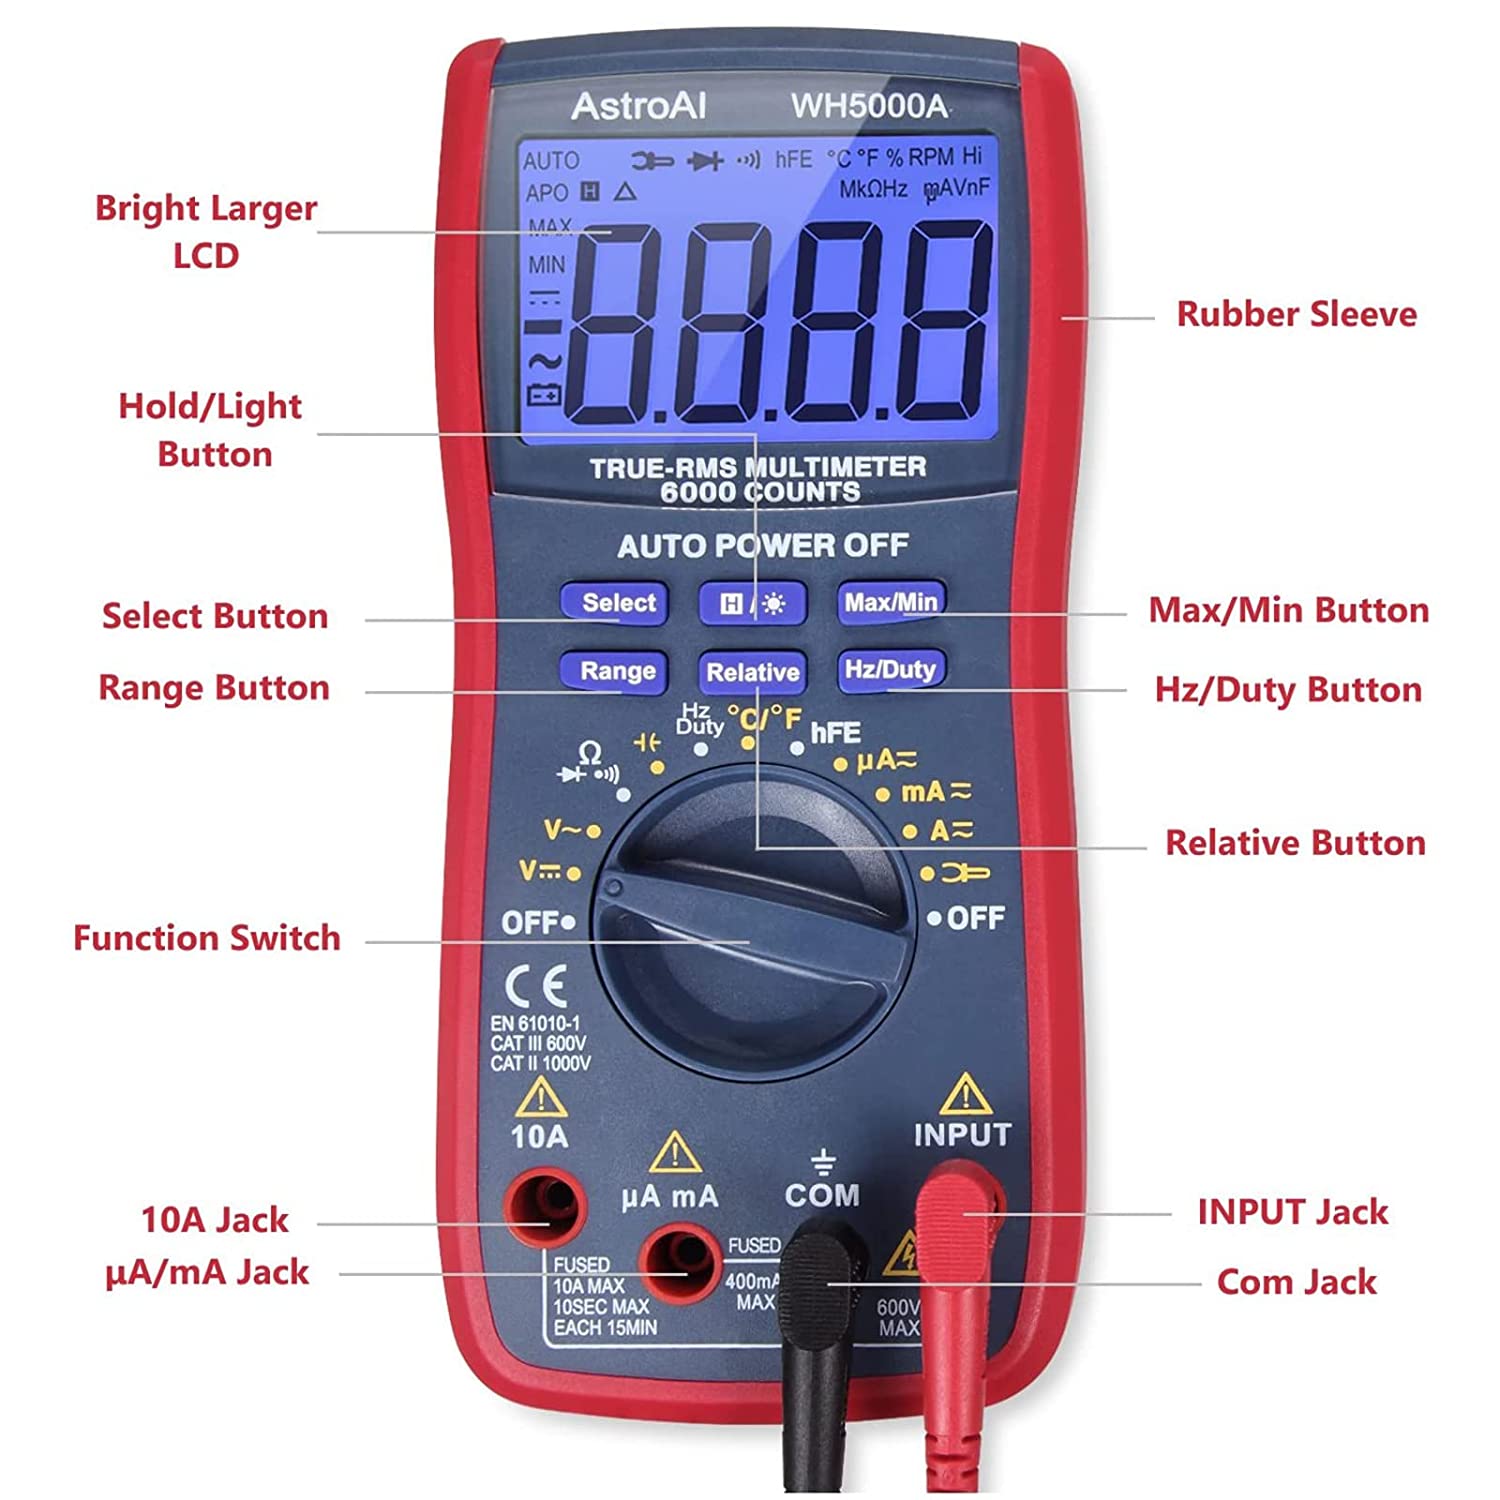 Digital Multimeter, AstroAI TRMS 6000 Counts Electrical Tester, Large Screen, Accurately Measures - image 3 of 9